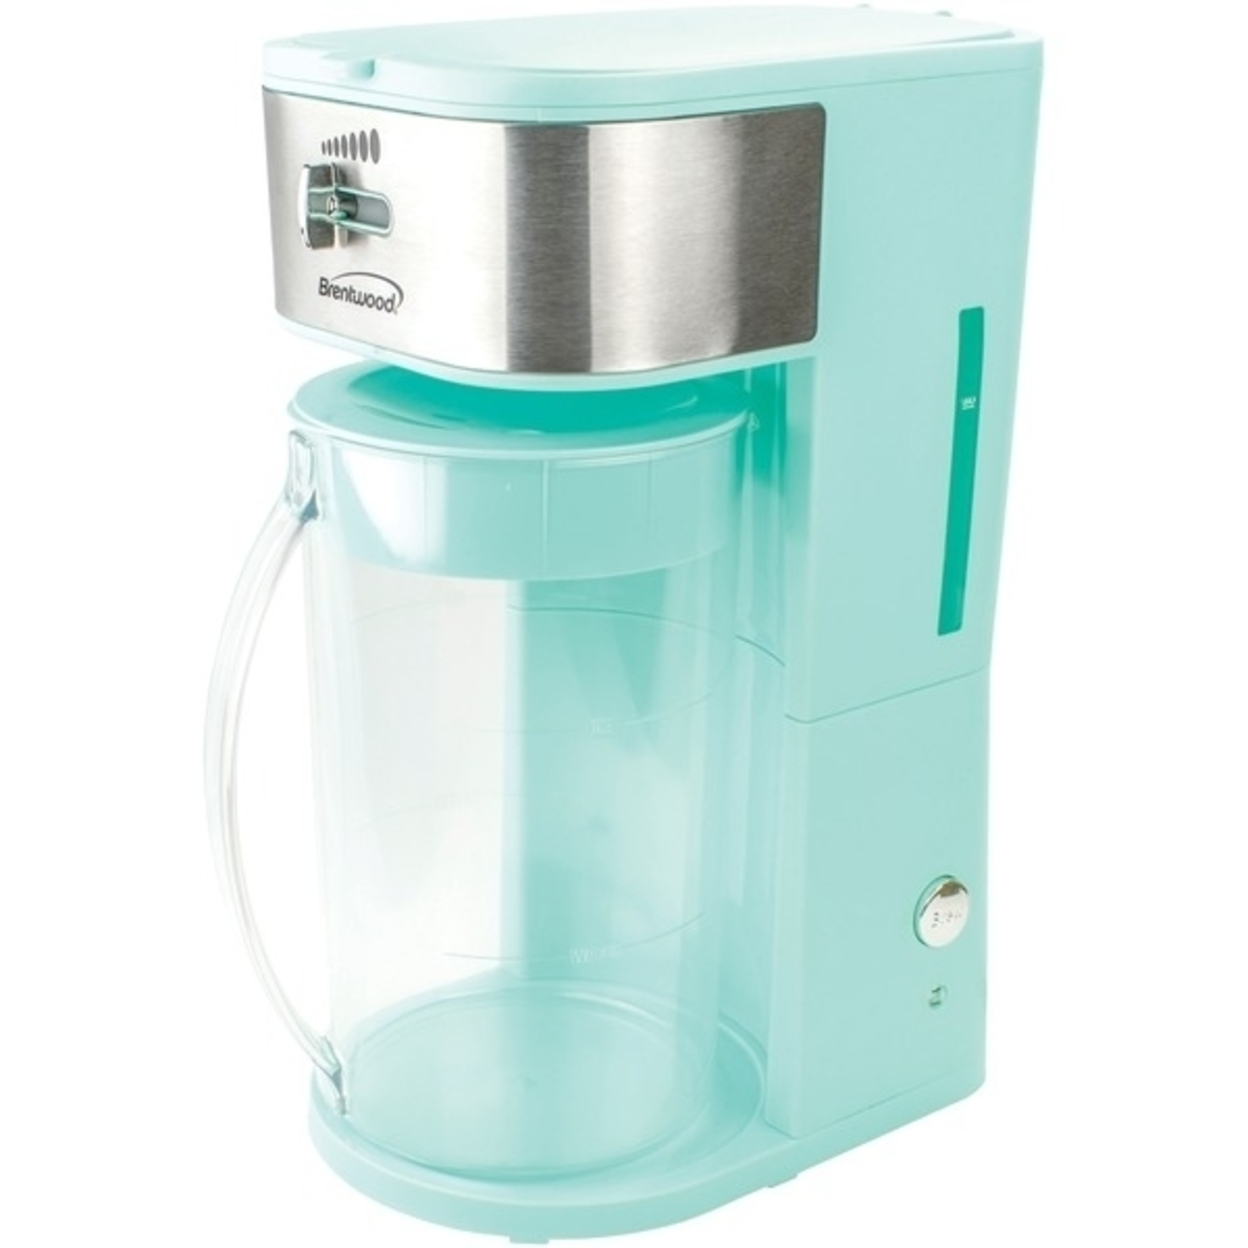 Brentwood KT-2150BL Coffee and Iced Tea Brewer with 64-Ounce Carafe, Blue C-4 - image 2 of 8